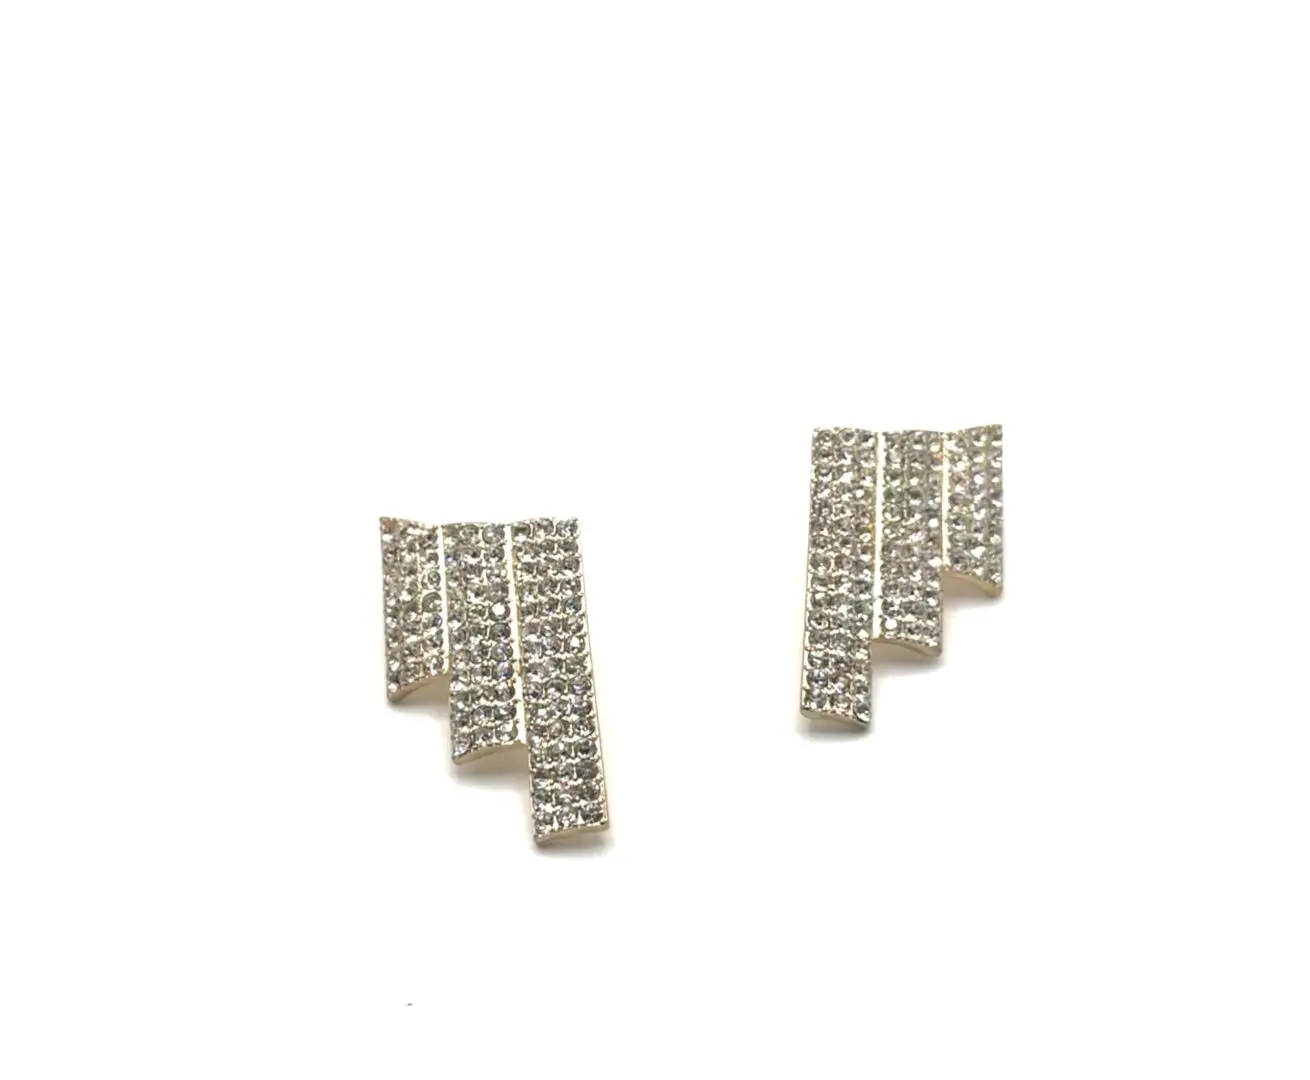 A pair of earrings with a pattern made out of letters.